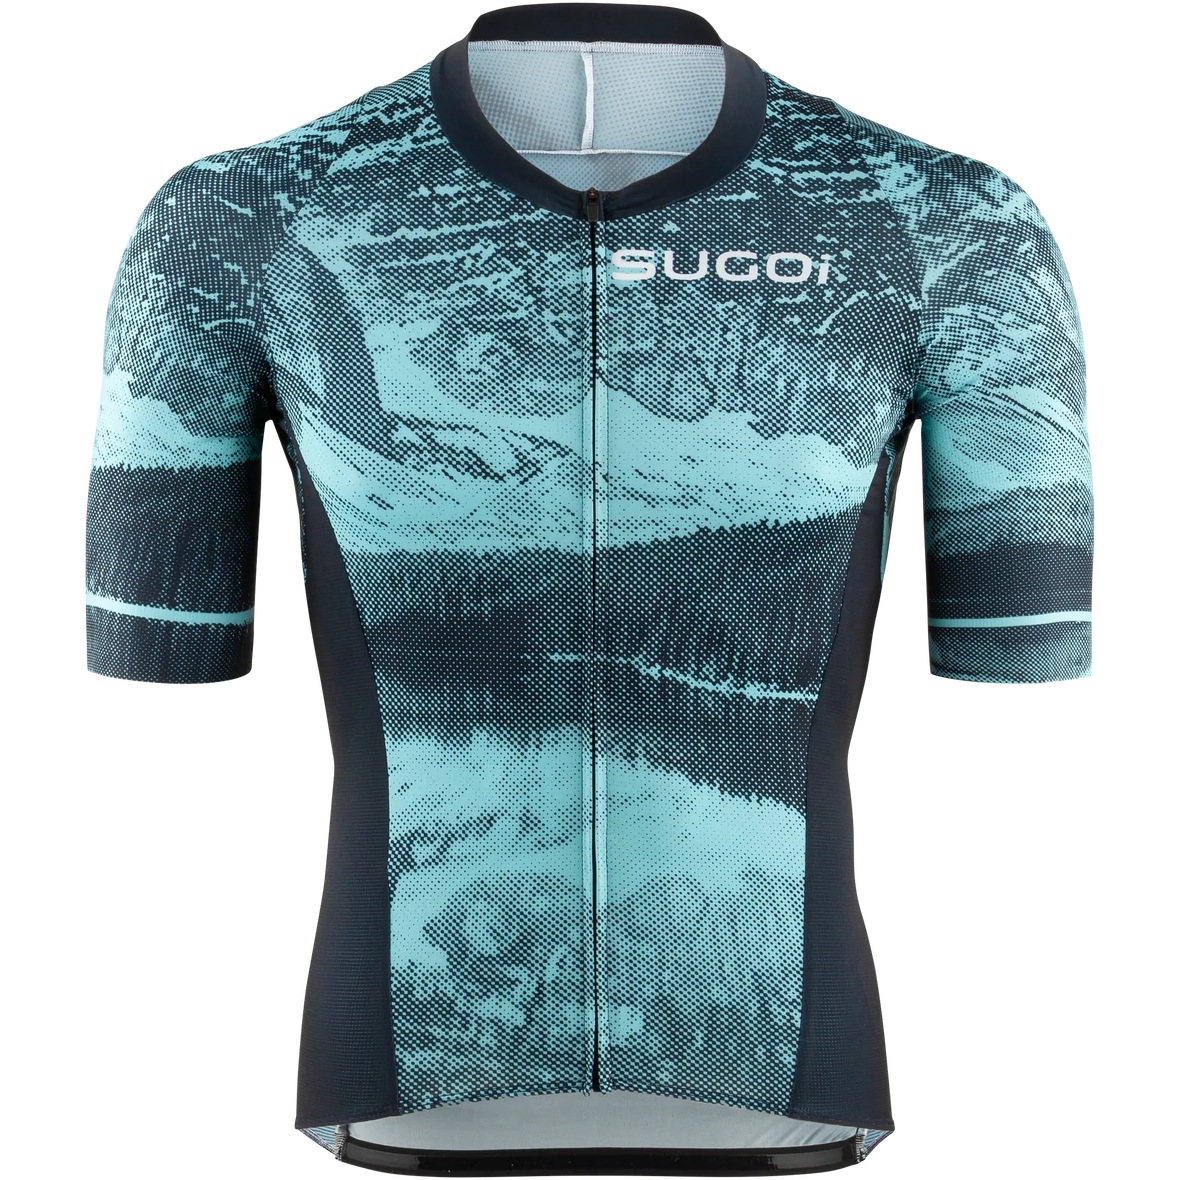 Productfoto van Sugoi RS Pro 2 Jersey - steel blue mountain